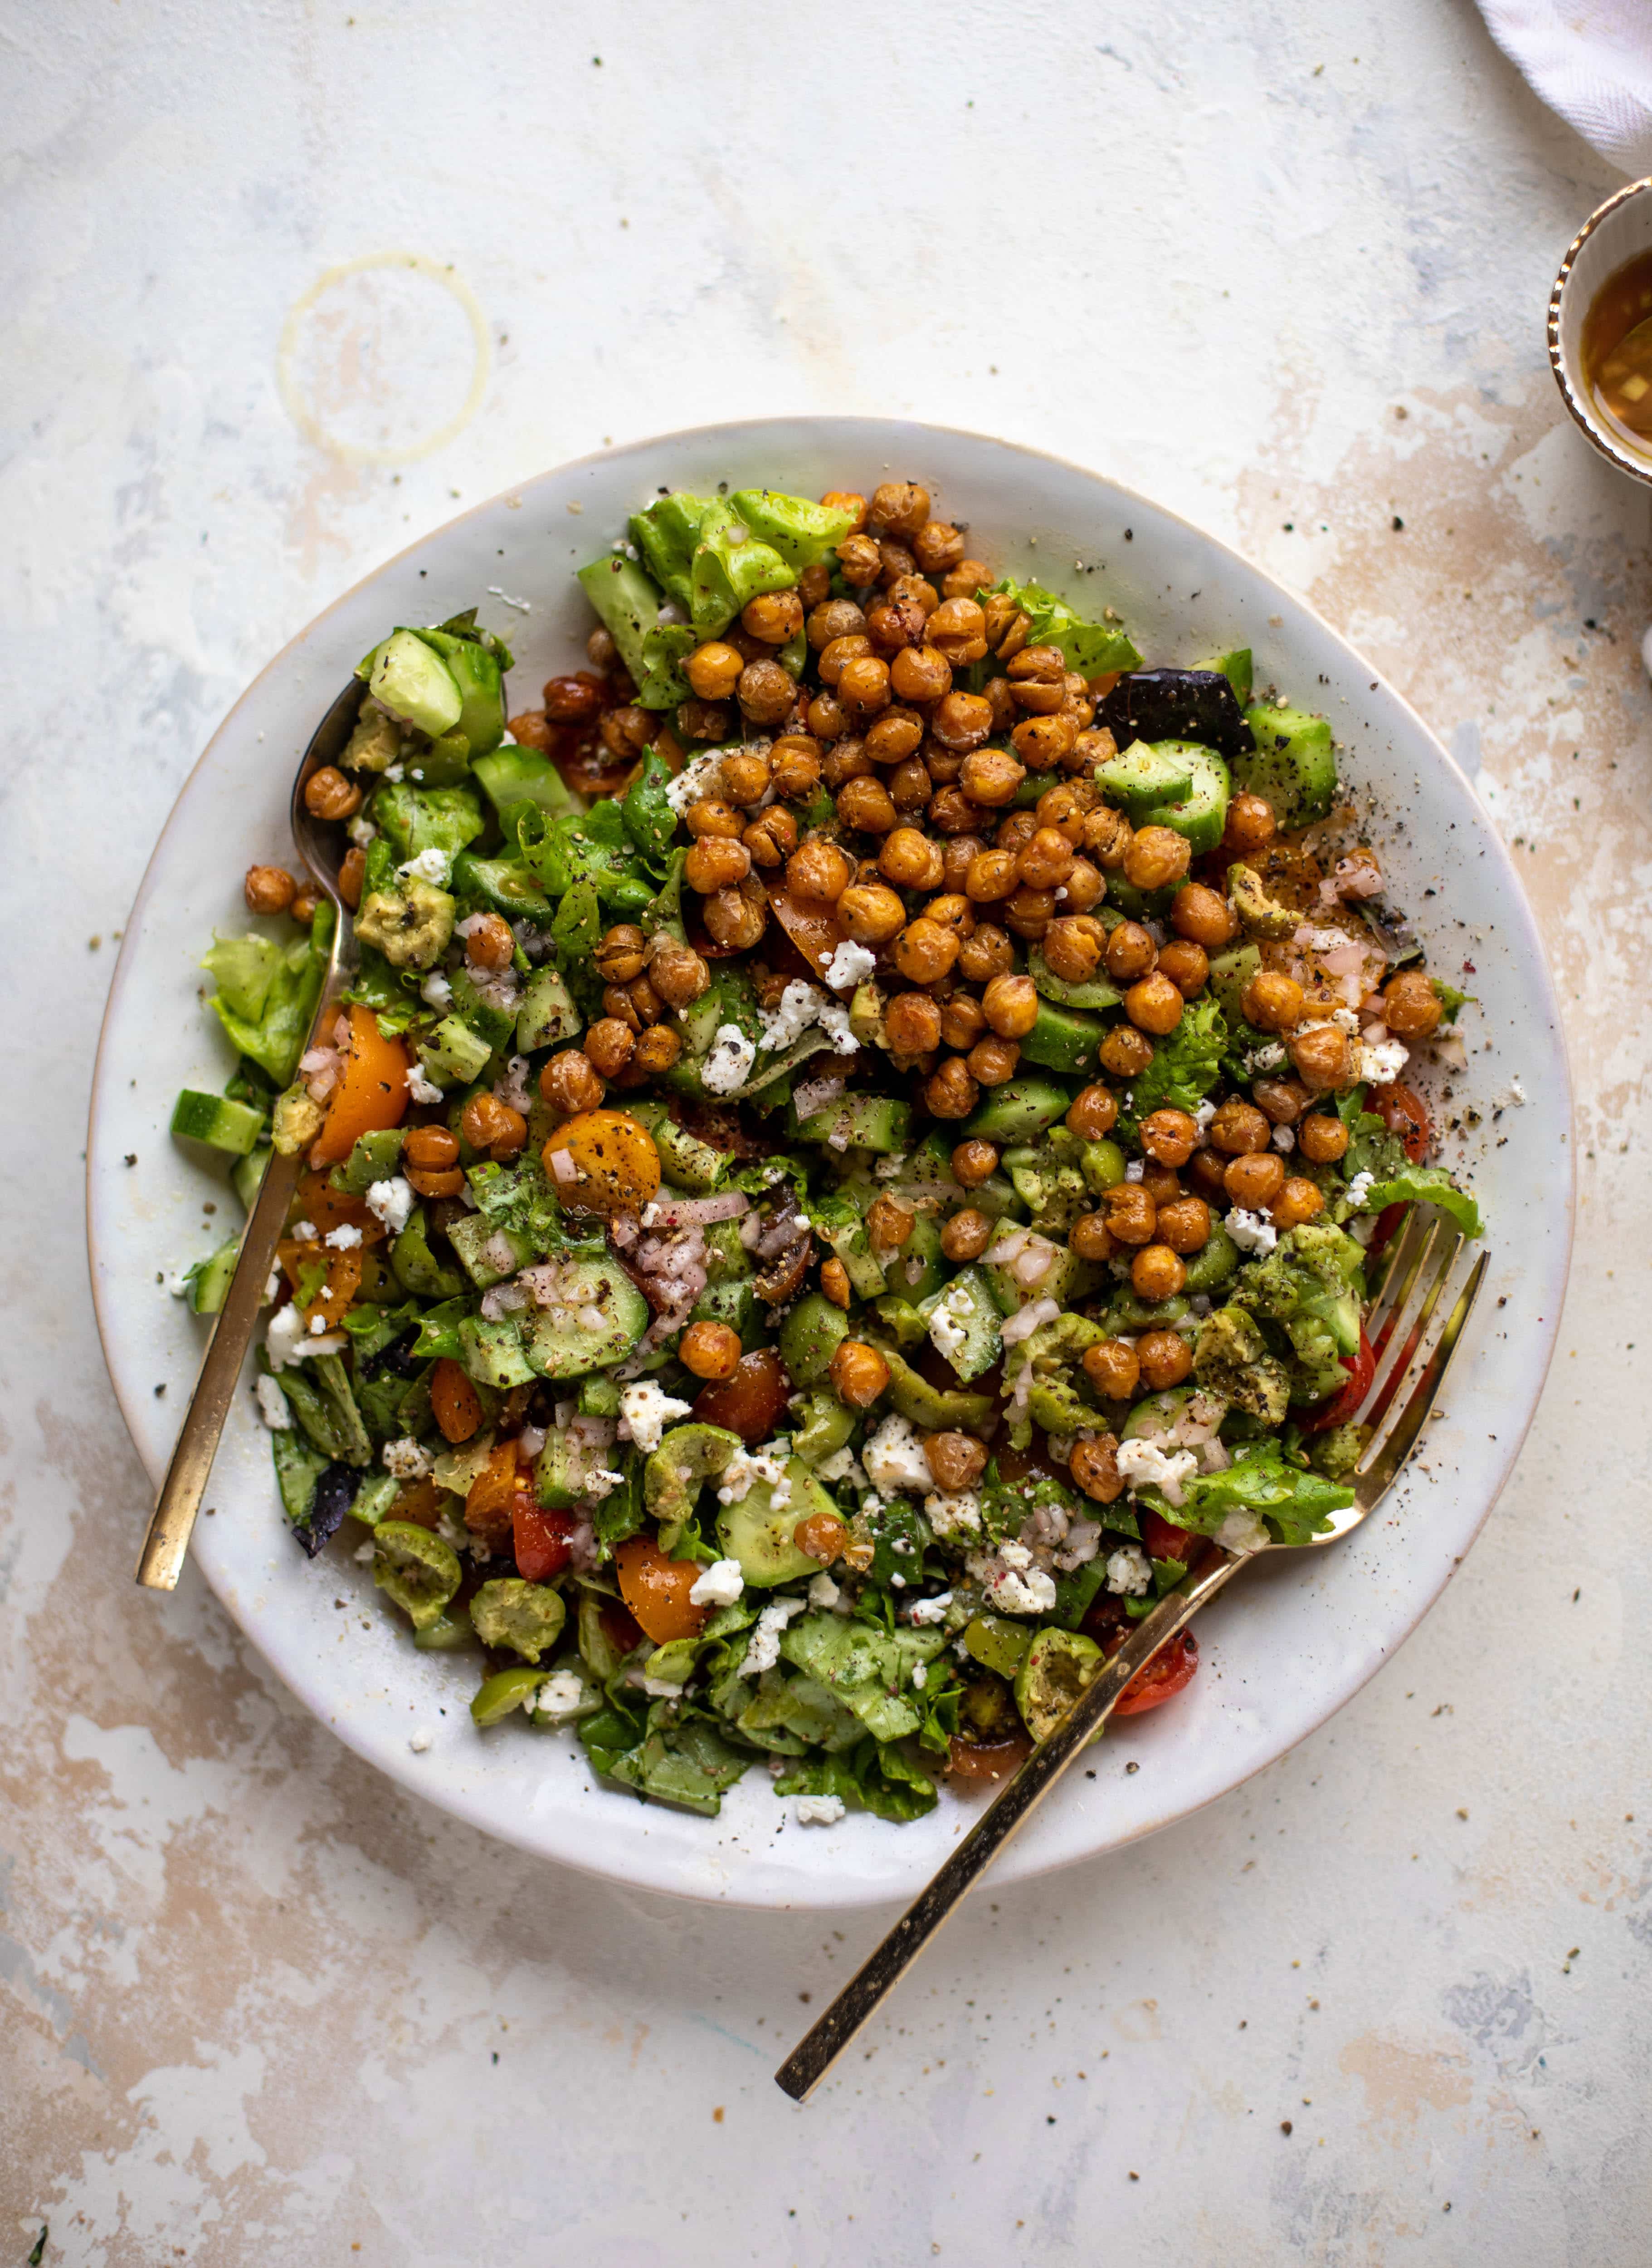 This crispy chickpea chopped salad is super simple and loaded with flavor. It's an incredible side or starter and a huge crowd pleaser! 